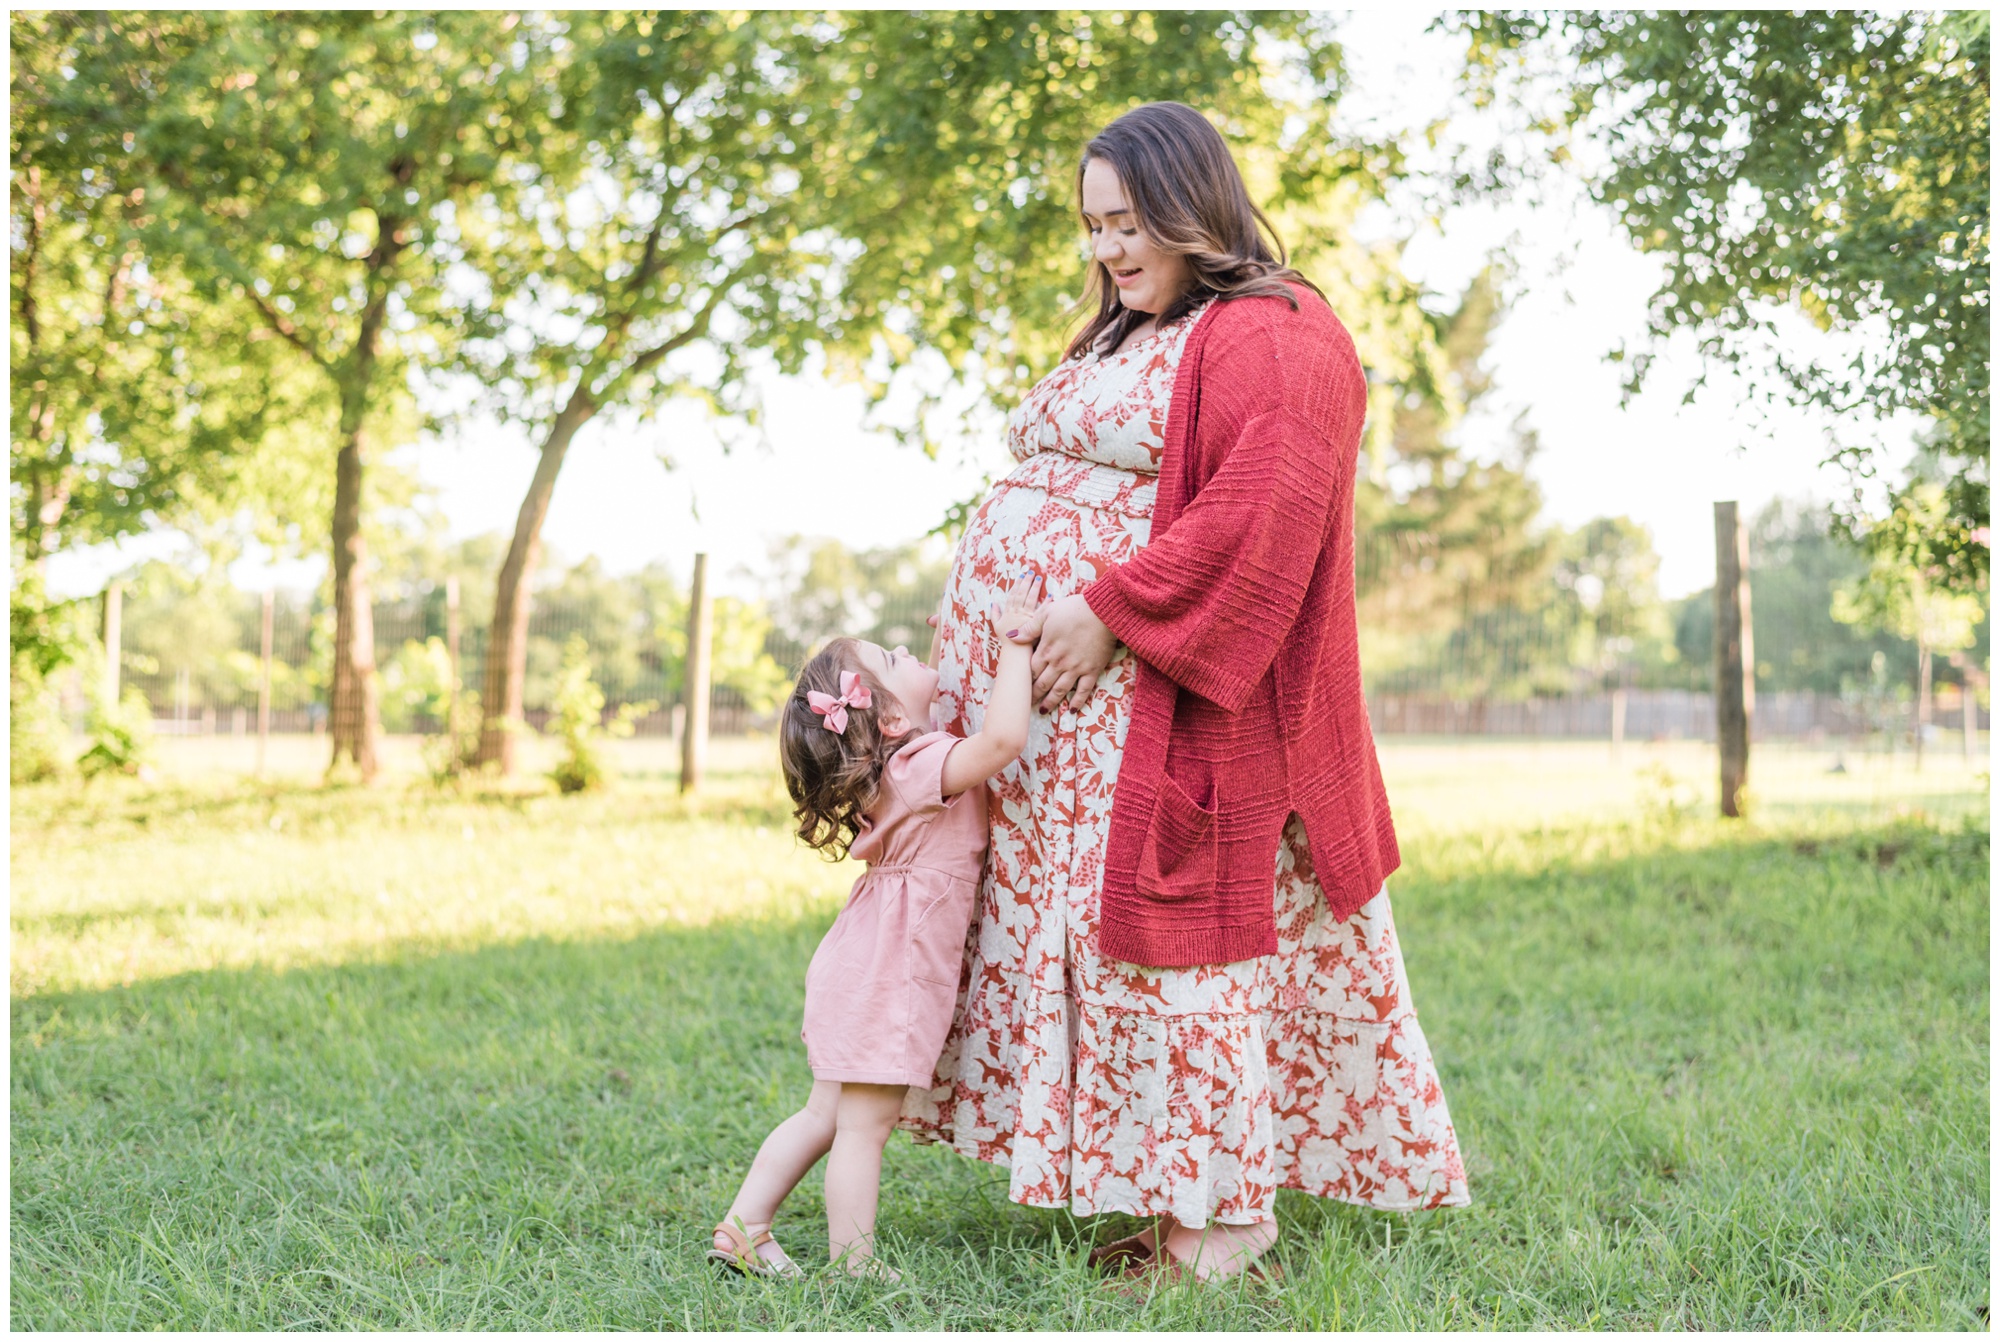 Fort Worth Family Session | Fort Worth Family Photographer | Lauren Grimes Photography